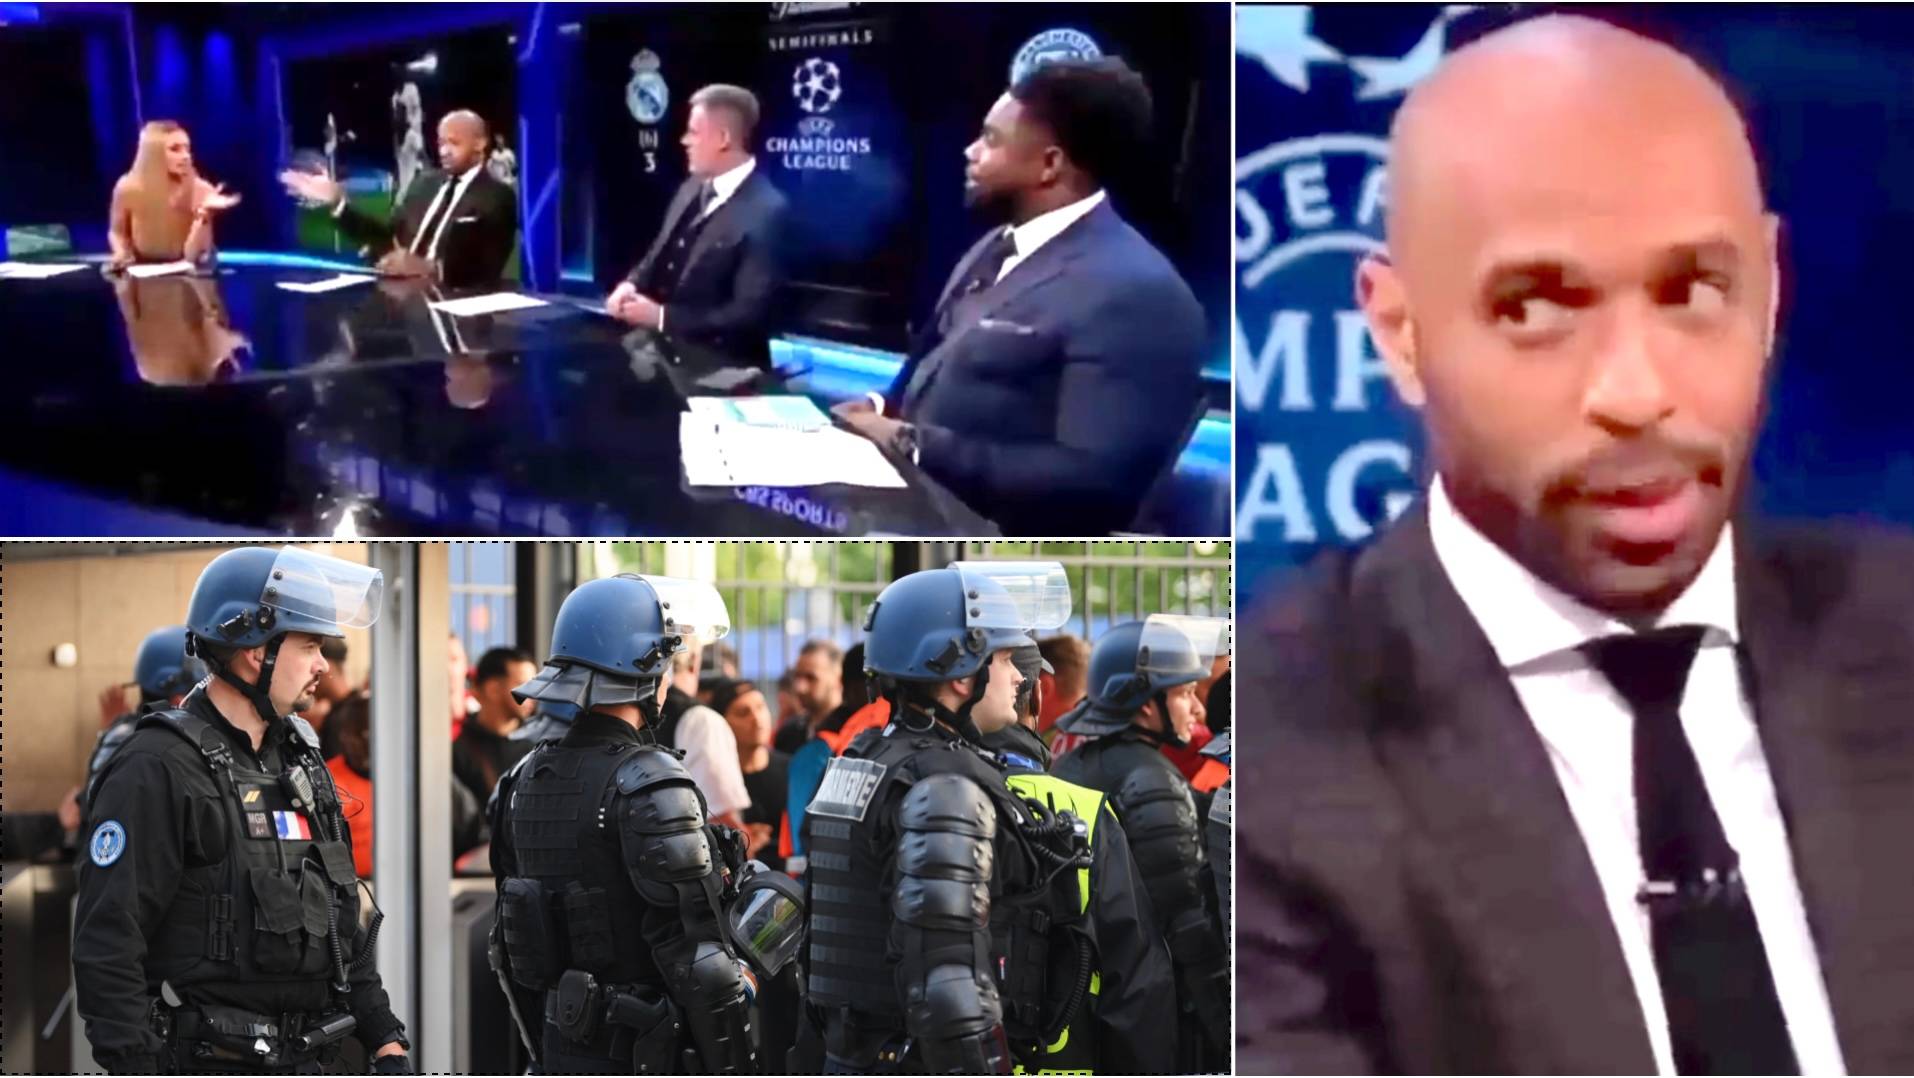 Thierry Henry’s comments about Saint-Denis from before Champions League final have gone viral